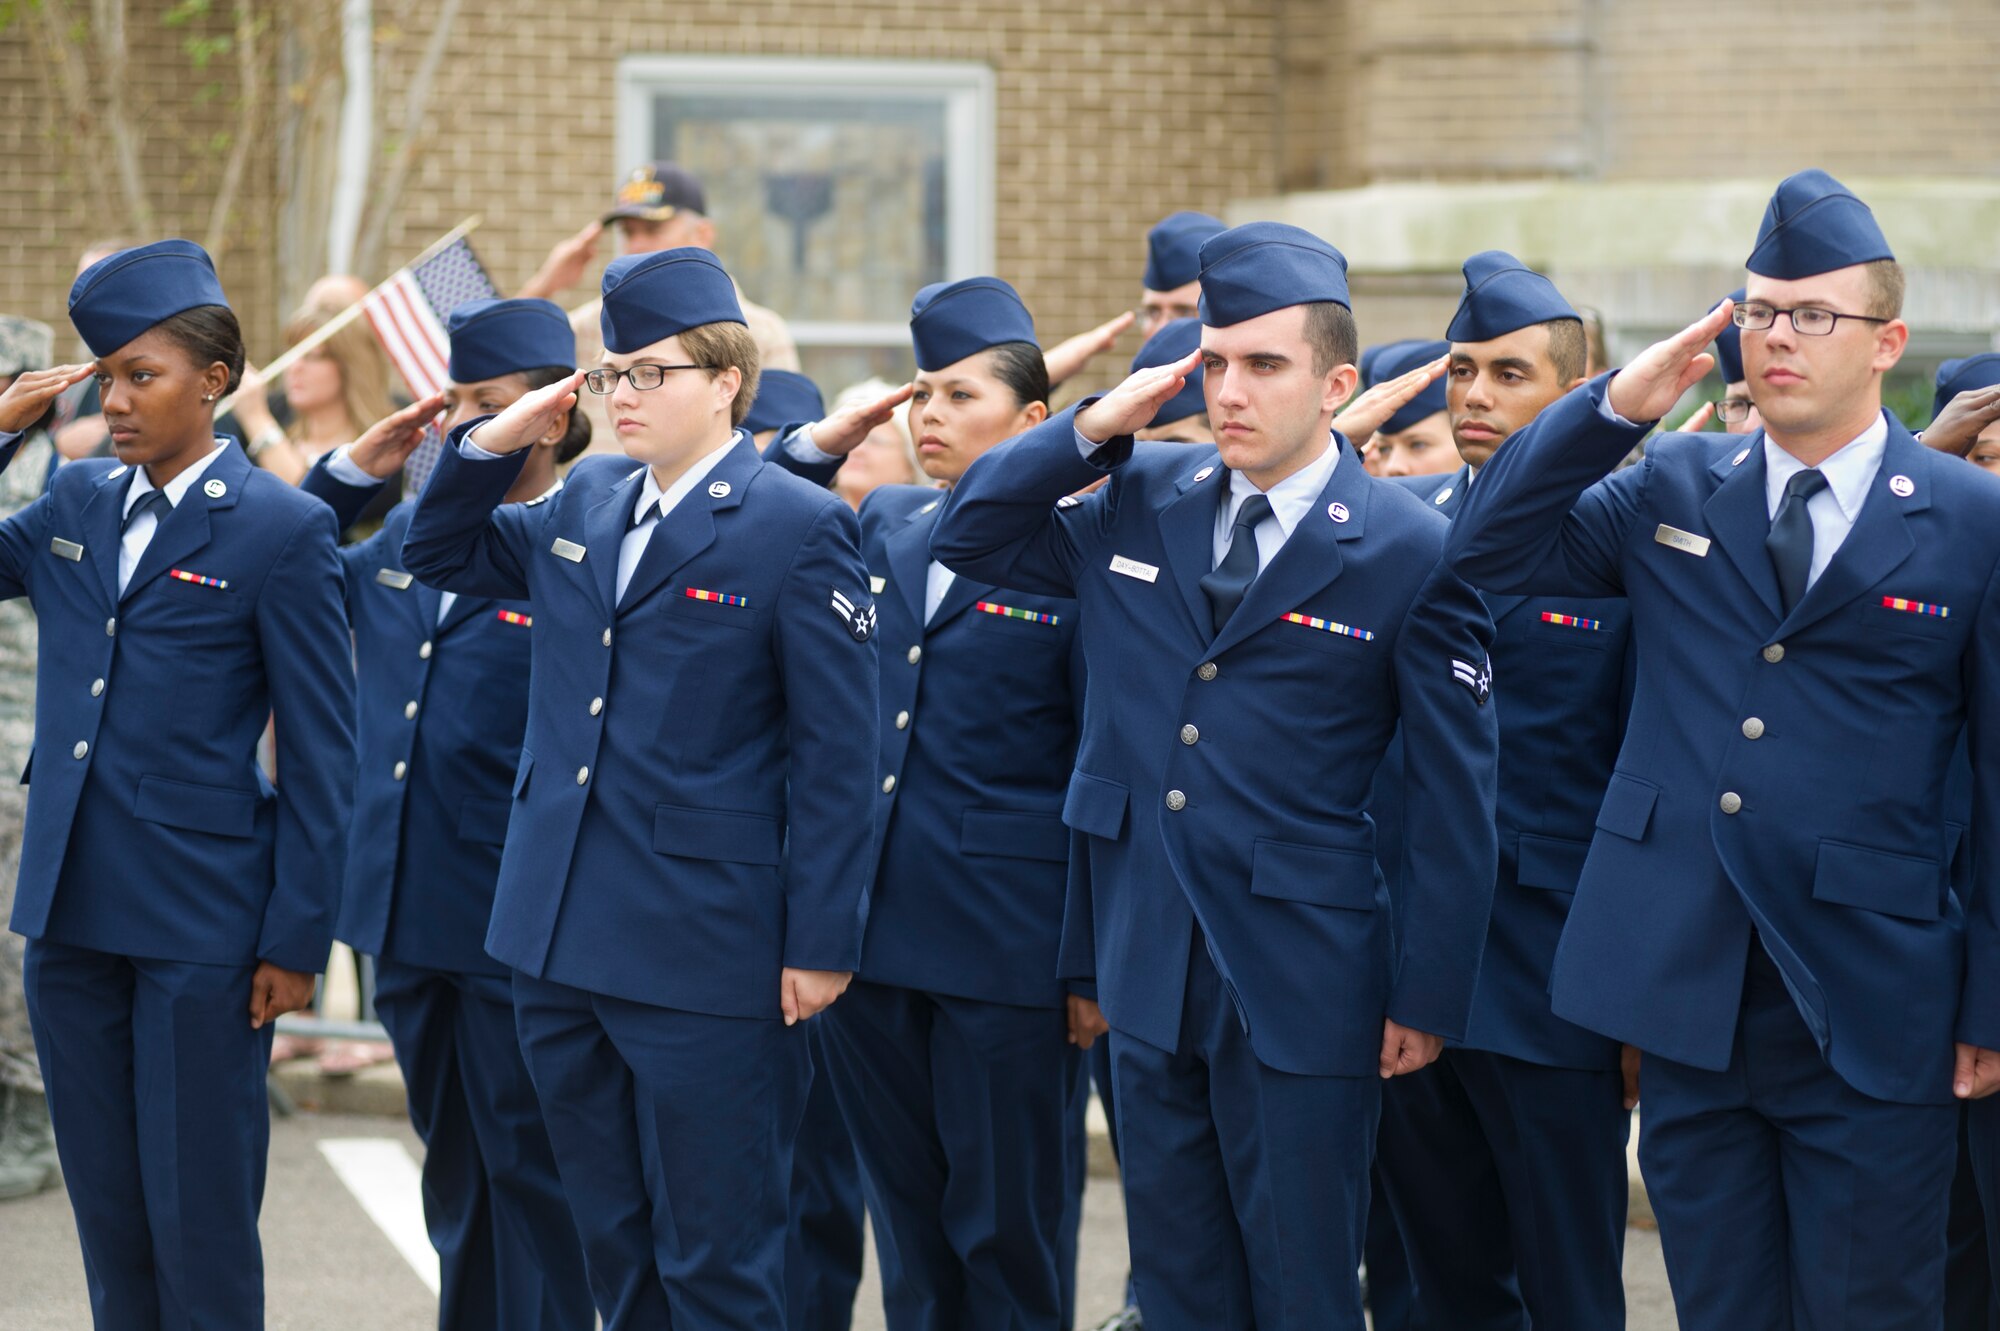 Airmen from Keesler Air Force Base, Miss., salute during the singing of the national anthem during the 12th annual Gulf Coast Veteran's Parade Nov. 10, 2012, in Gulfport.  Brig. Gen. Brad Spacy, 81st Training Wing commander, and Col. Rene Romero, 81st TRW vice commander, led participants from Keesler.  Keesler marching units included the honor guard, the 50 state flags carried by the 334th Training Squadron, student marching groups from the 335th and 336th Training Squadrons and the 81st Training Group’s drum and bugle corps. (U.S. Air Force photo by Adam Bond)